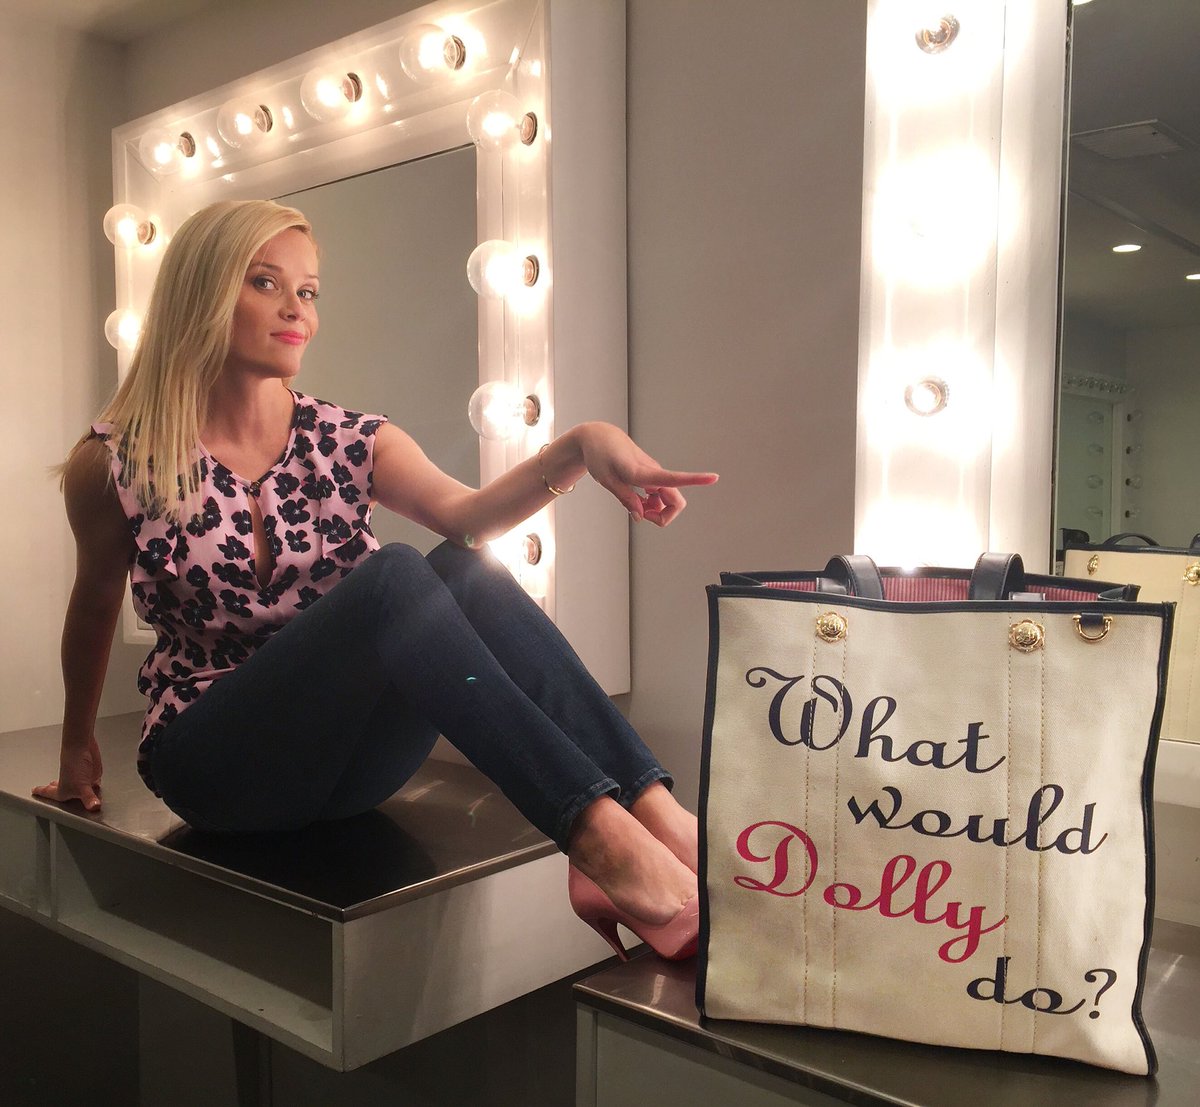 When in doubt, just ask ... #WhatWouldDollyDo ???? @DollyParton ???? @draperjames https://t.co/46EFh8xdW0